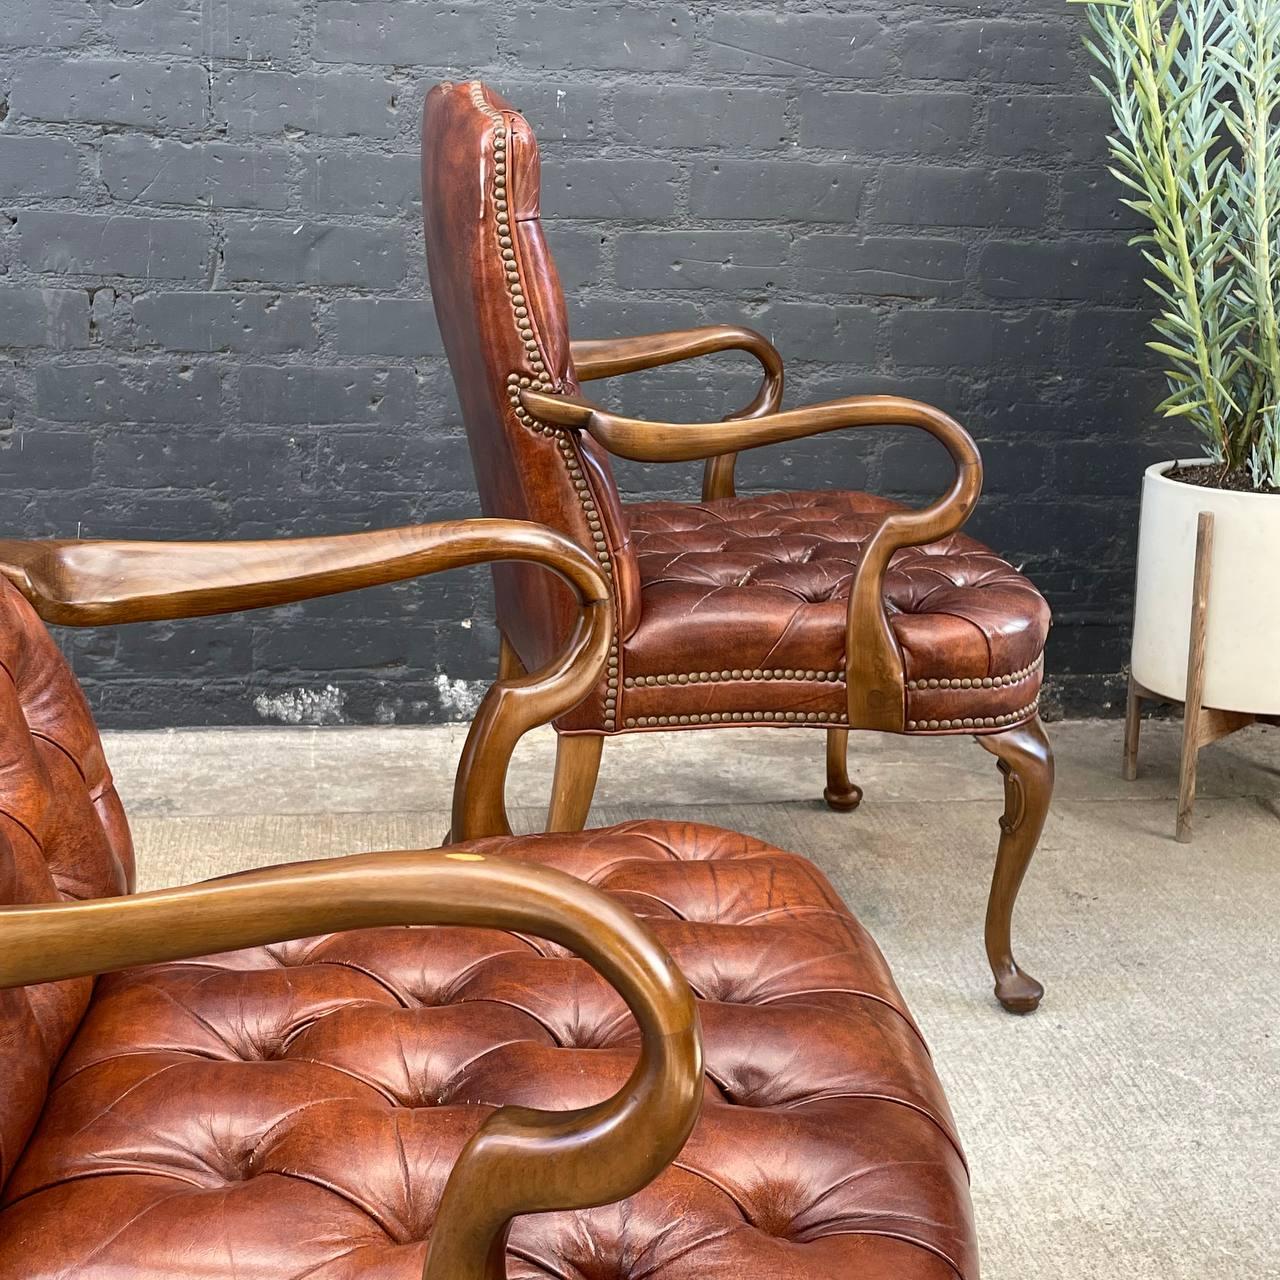 Set of 8 Mid-Century Modern Chesterfield Style Cognac Leather Arm Chairs 1